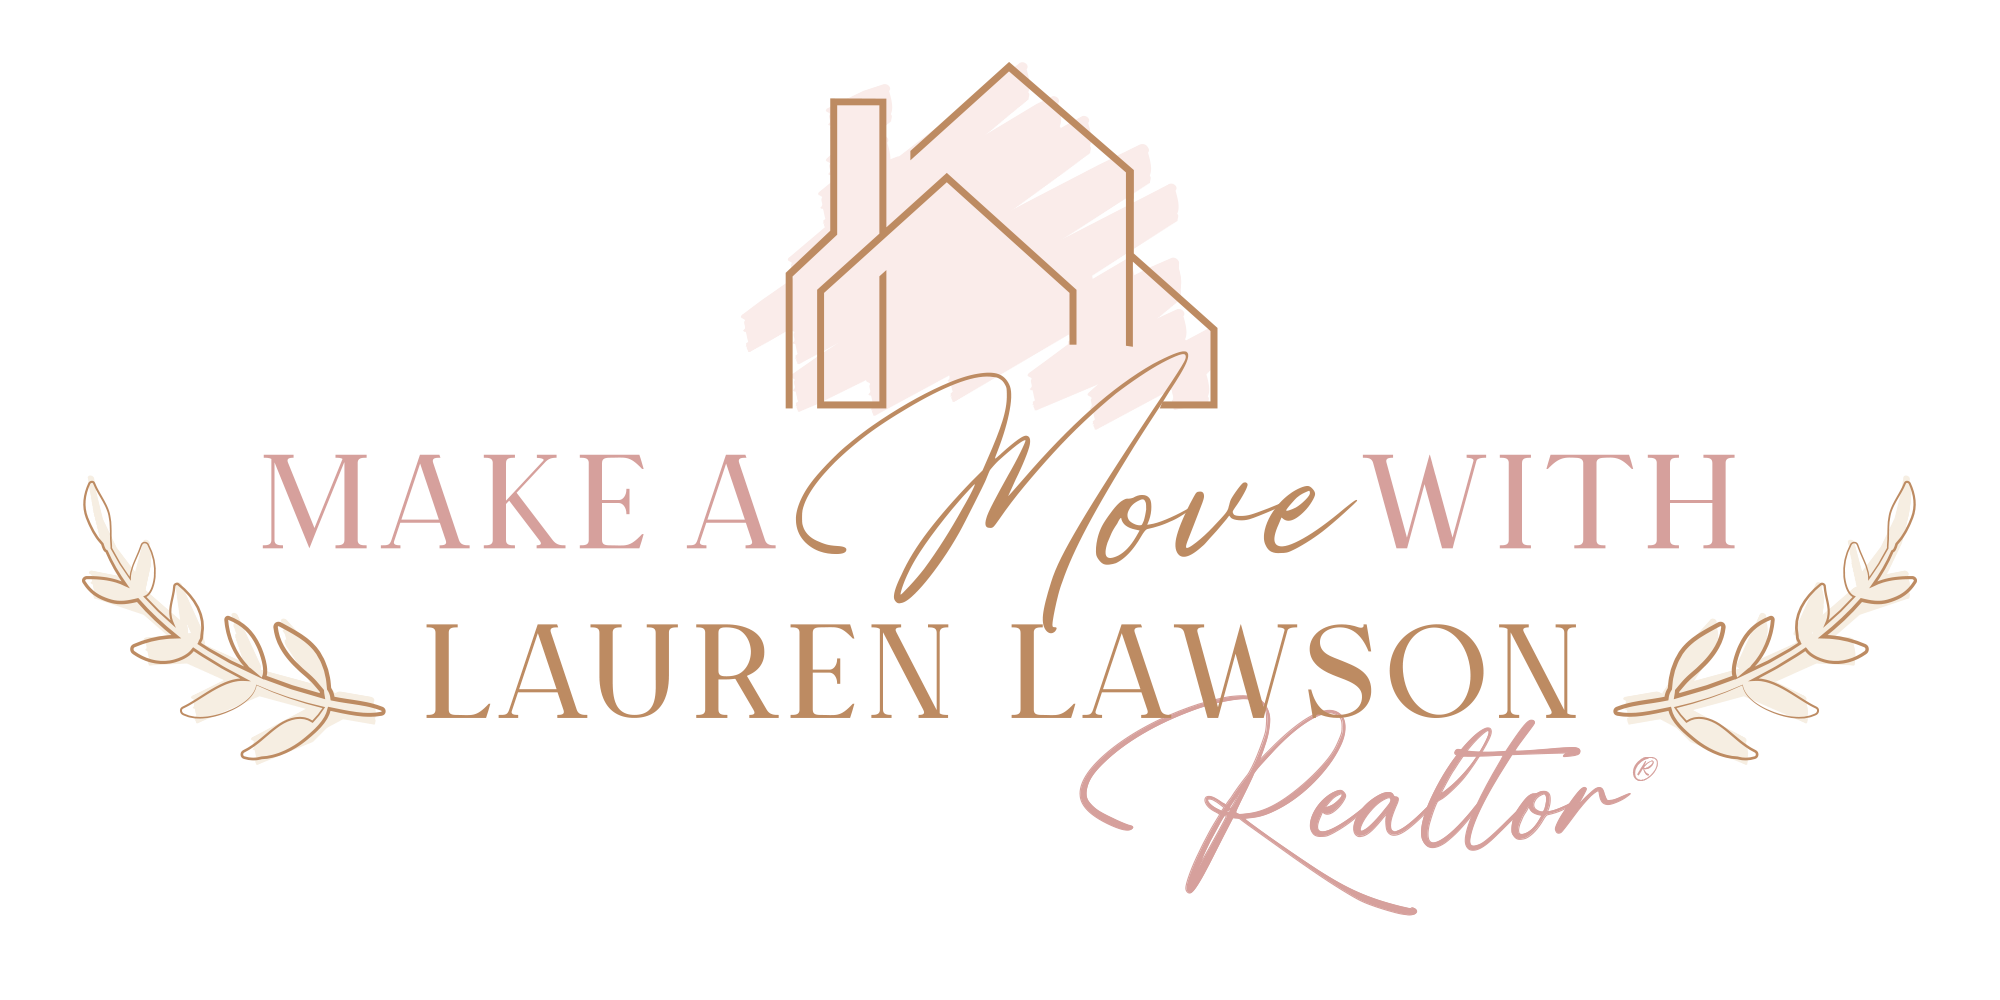 Make a Move with Lauren Lawson